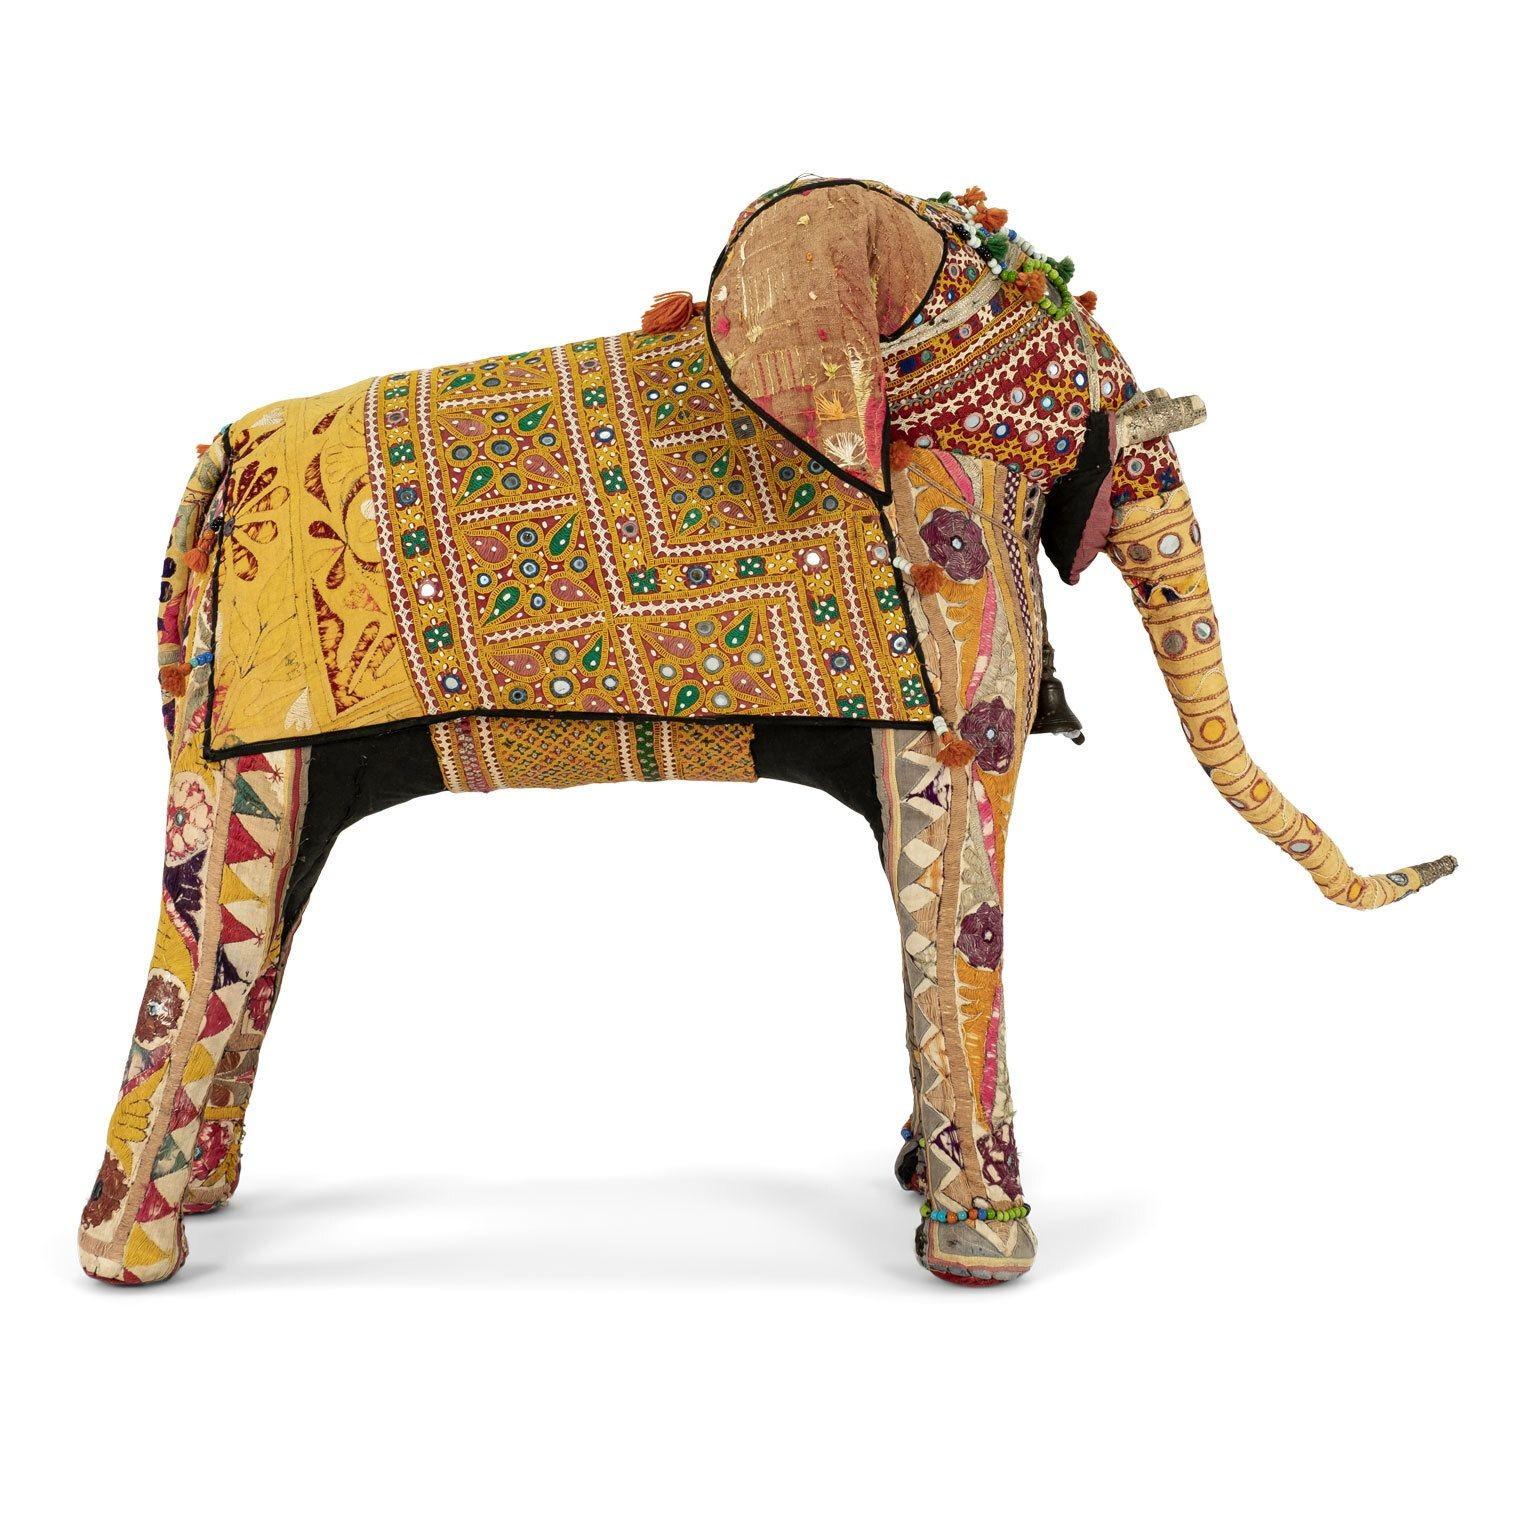 Folk Art Massive Vintage Cotton Elephant Covered in Indian Textiles For Sale